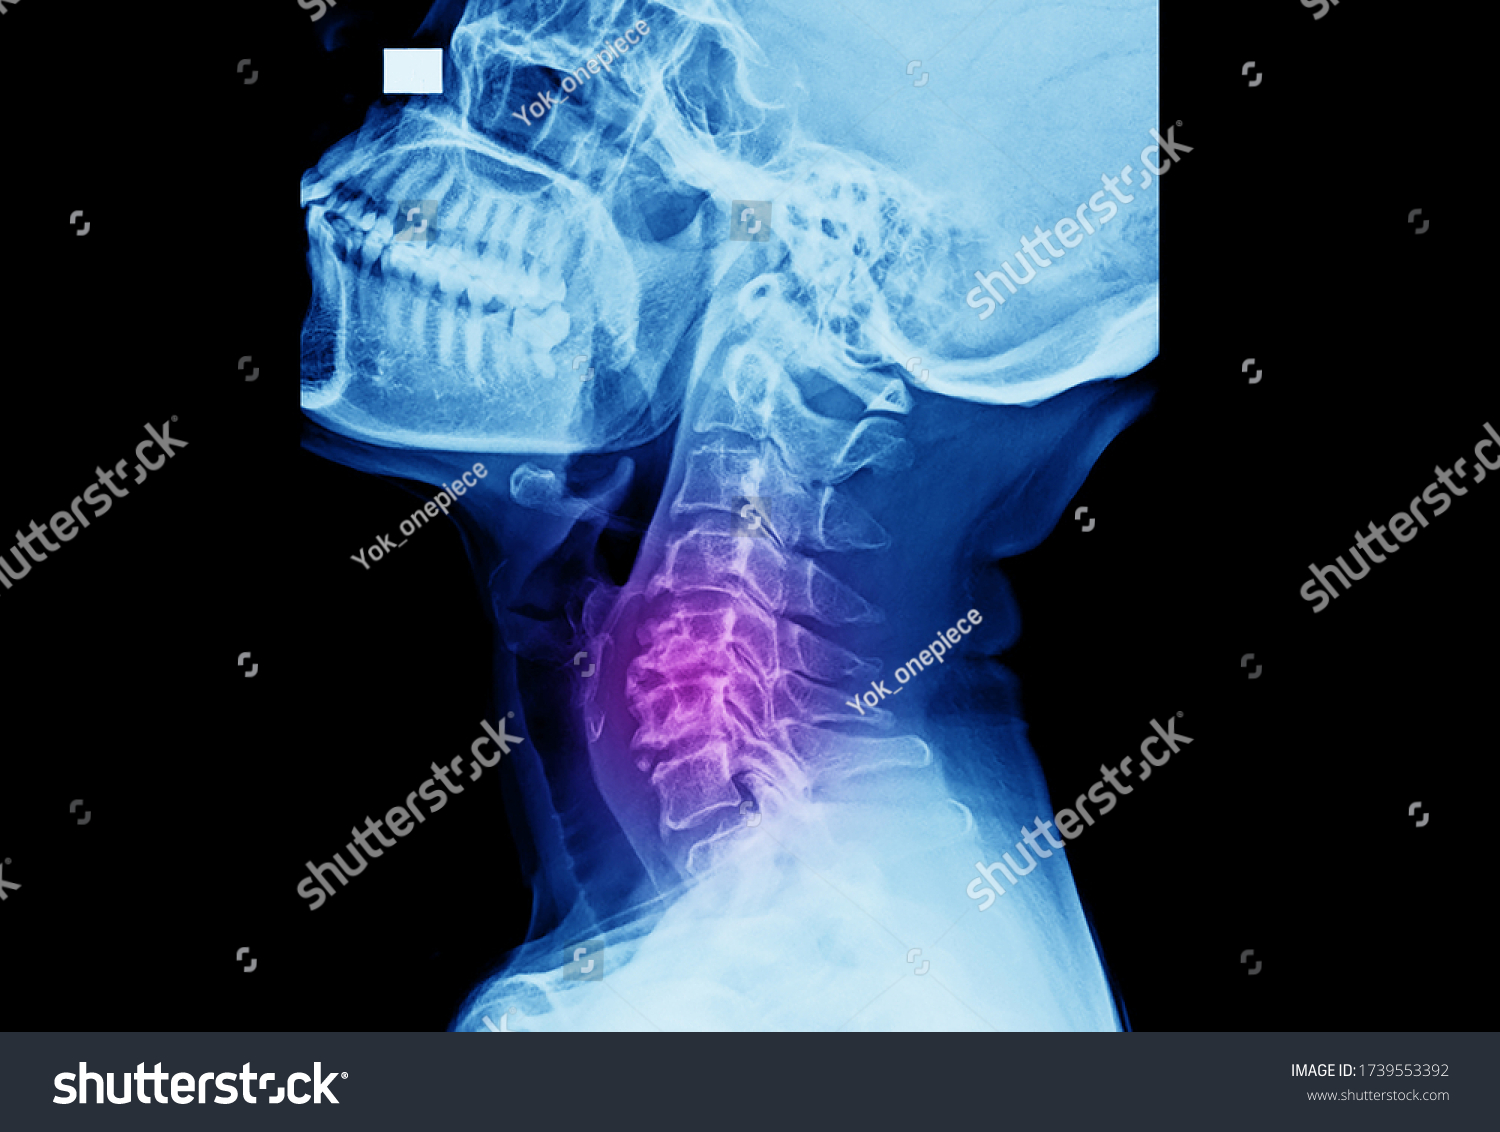 Lateral projection x-ray of cervical spine showing cervical spondylosis at multiple levels. This disease causes neck pain, radioculopathy and myelopathy.  #1739553392